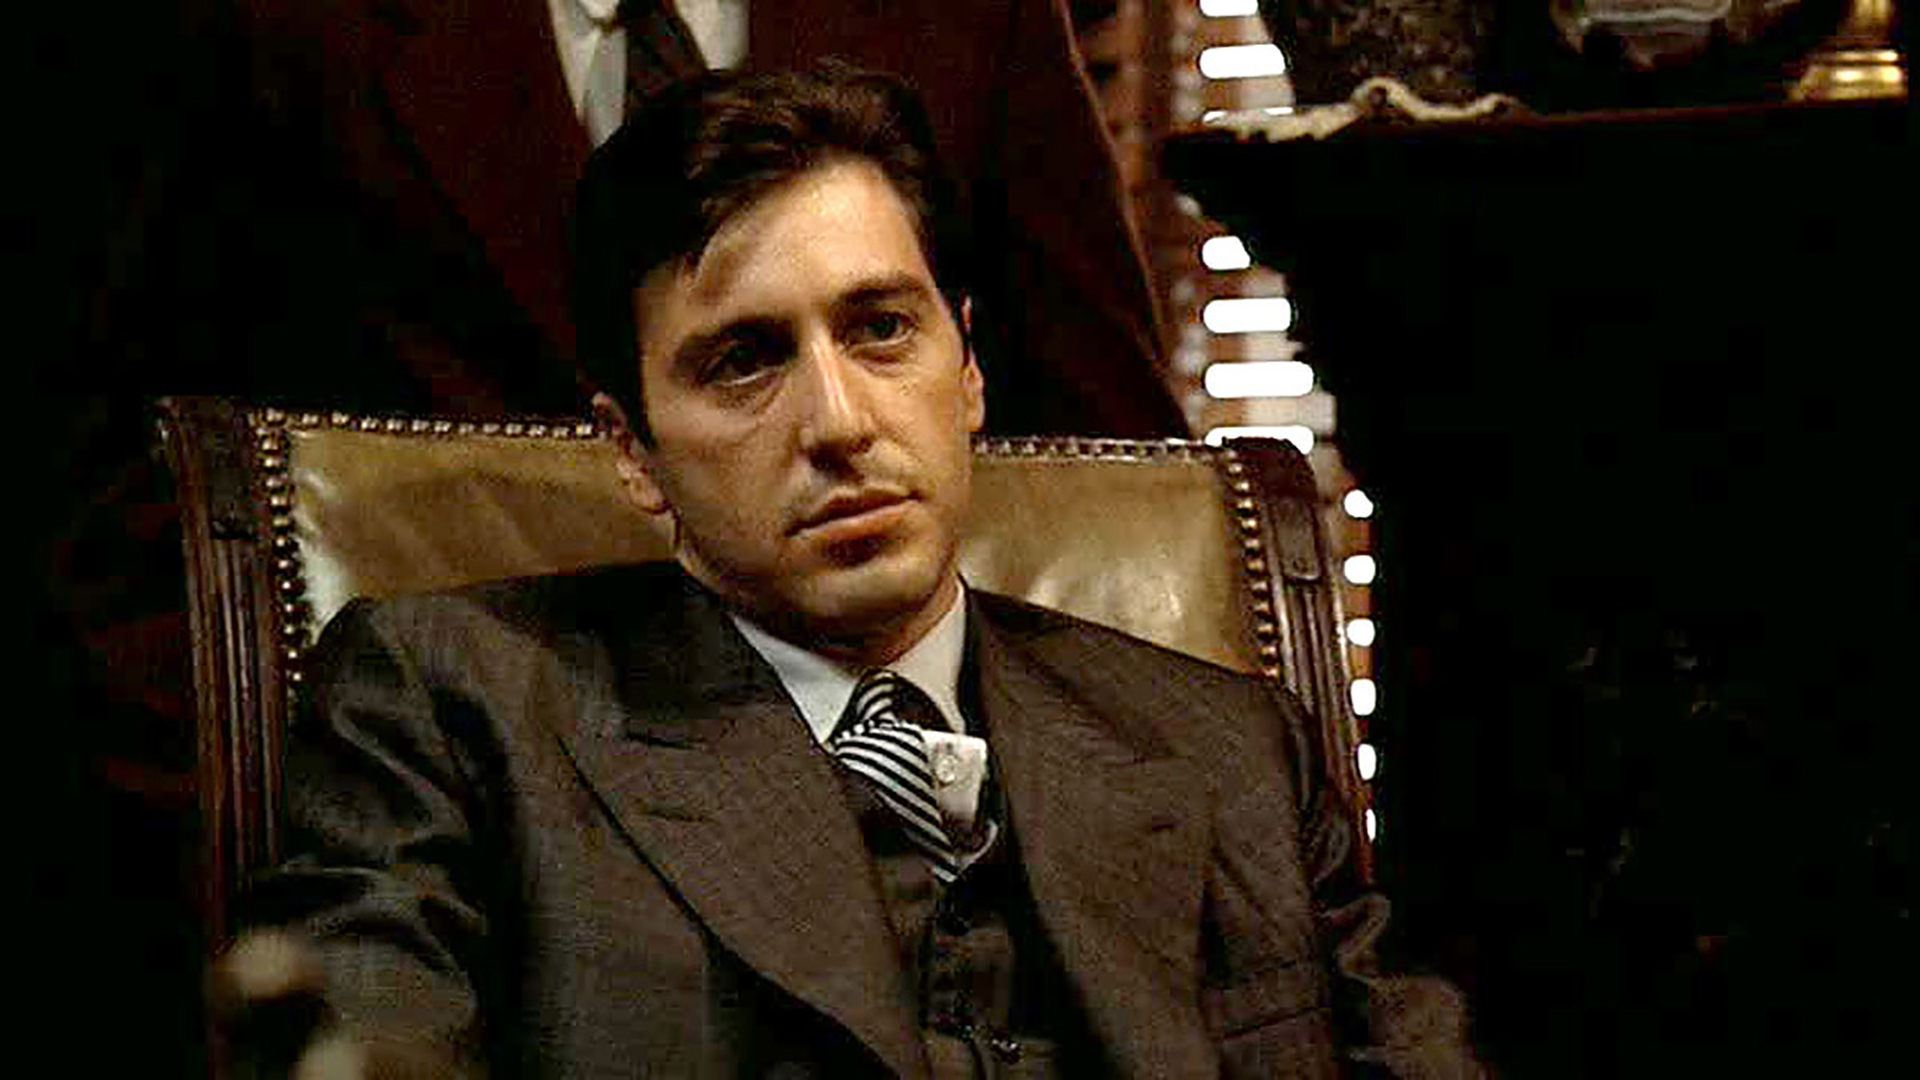 Al Pacino told the 20-year-old offered his body in exchange for room and board